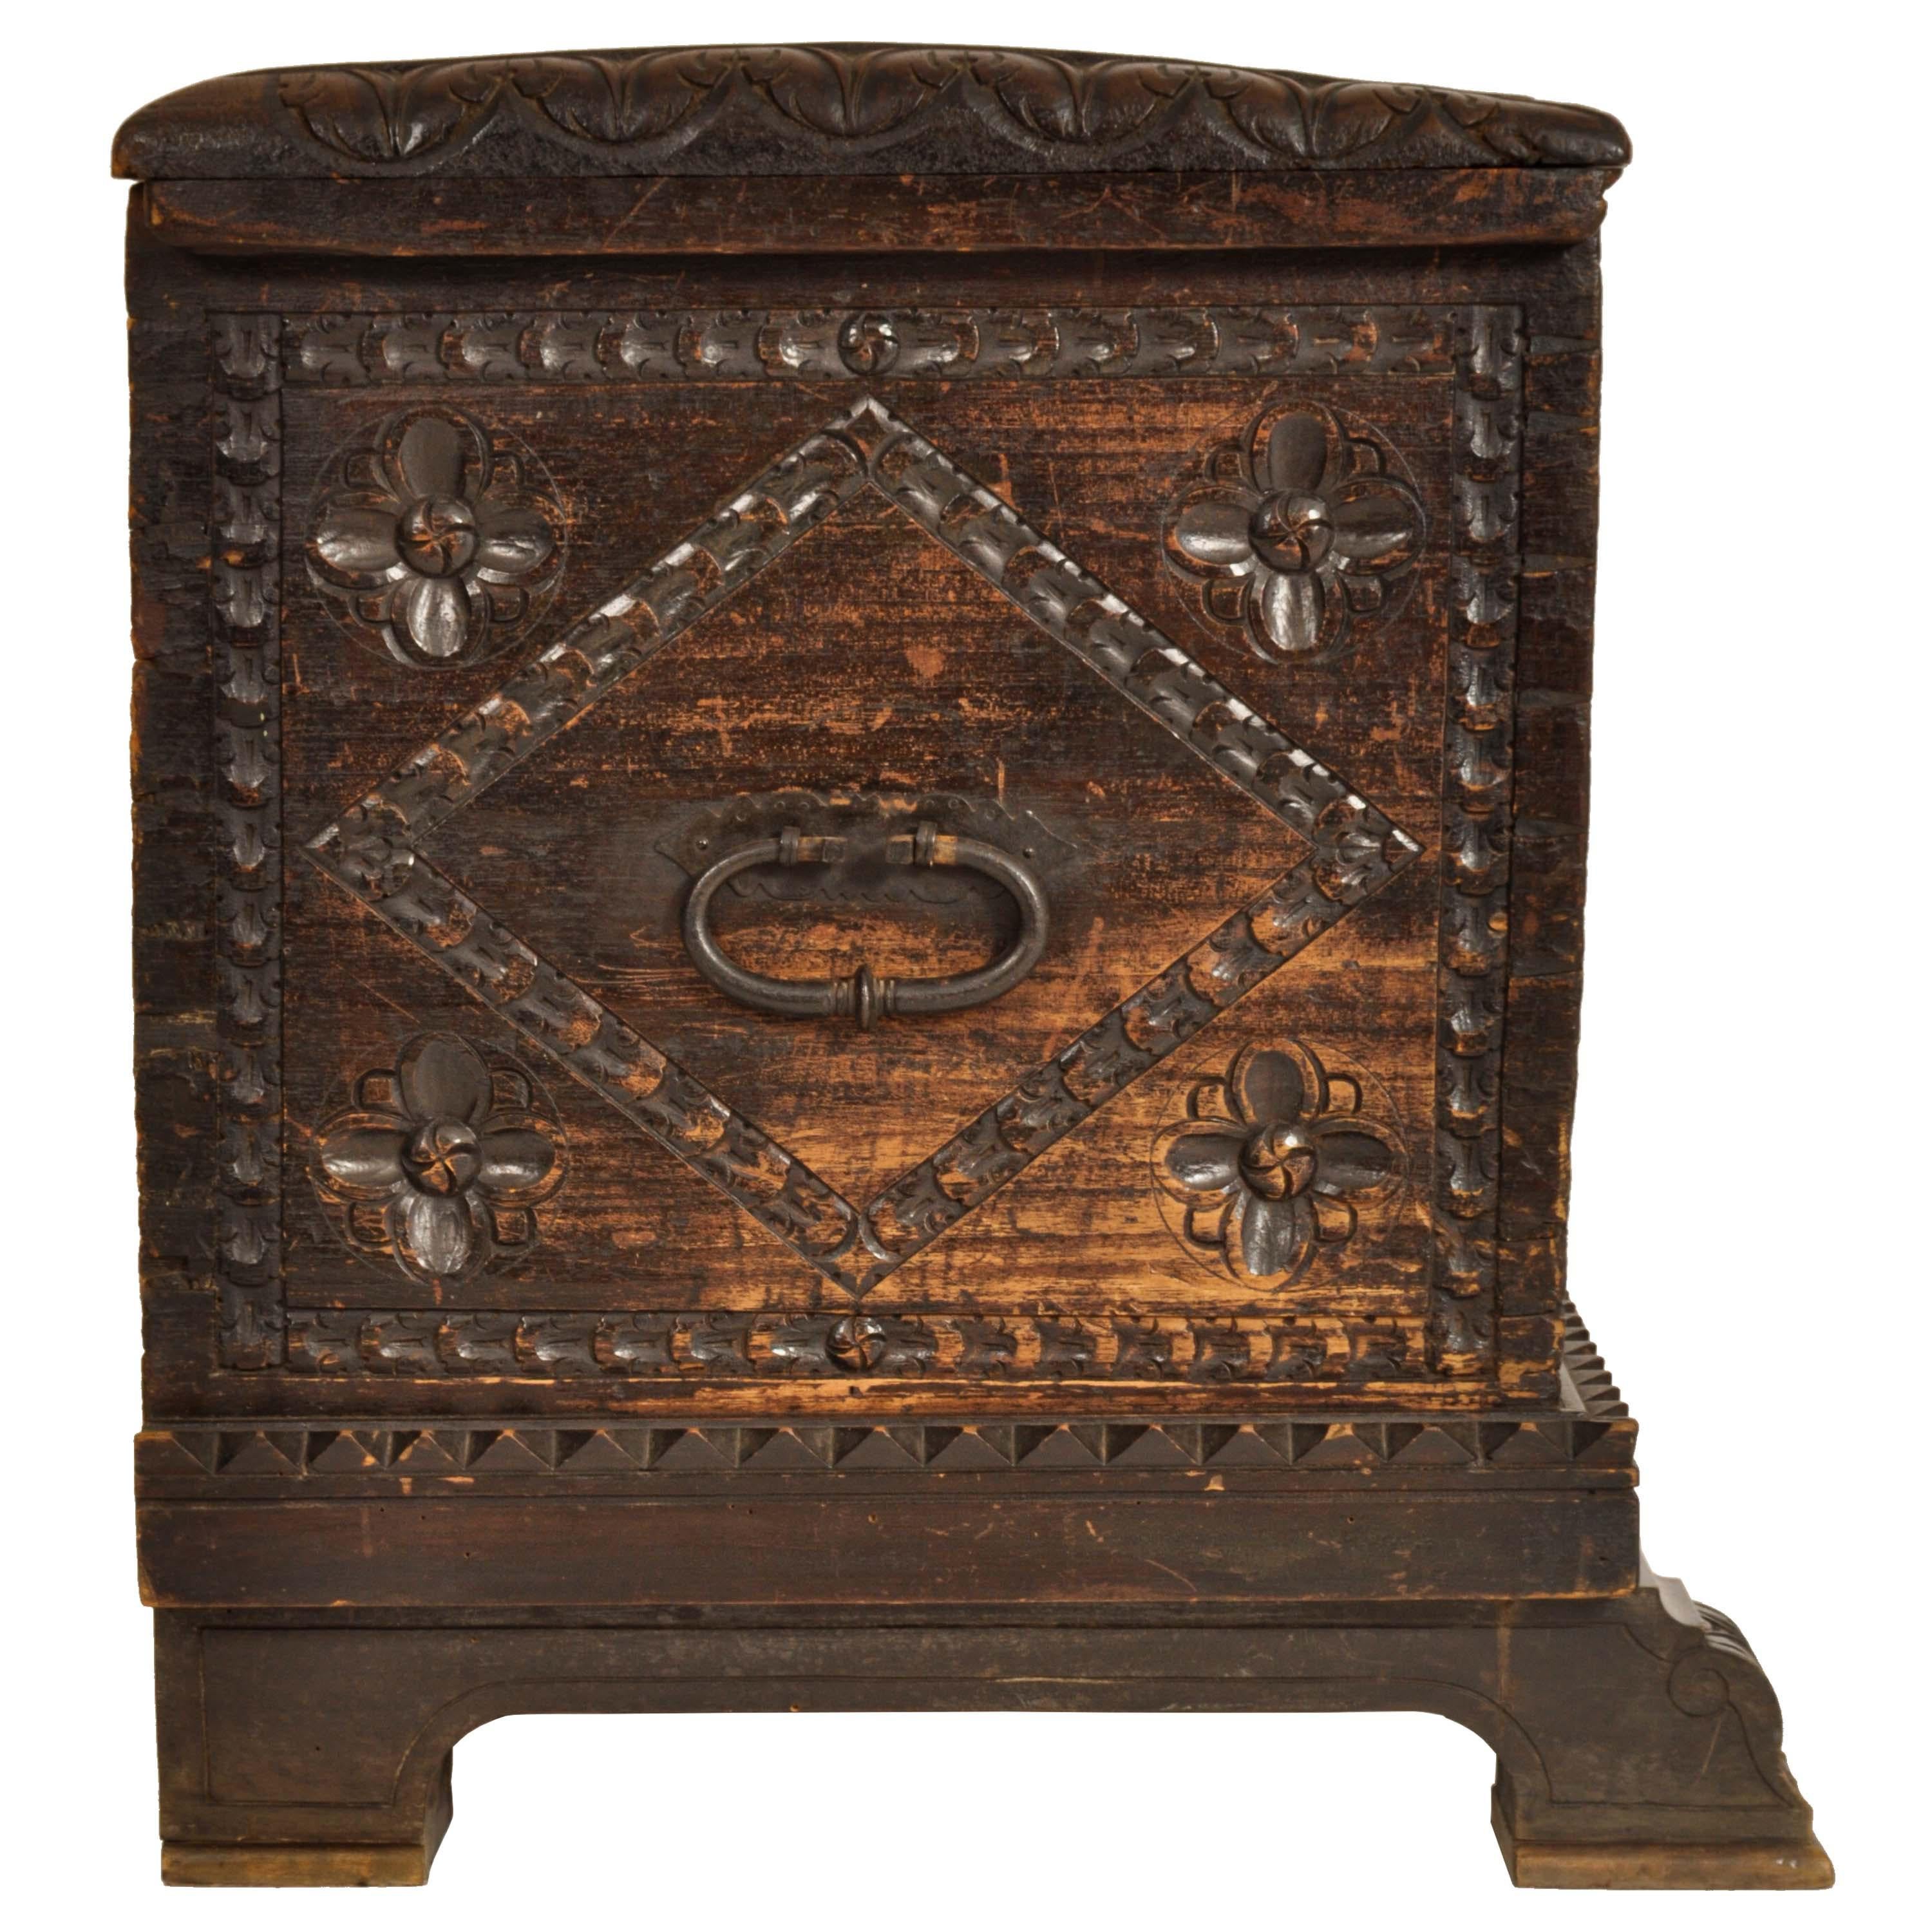 Antique Scandinavian Pine Baroque Folk Art Carved Dowry Chest Trunk Coffer 1780 For Sale 8